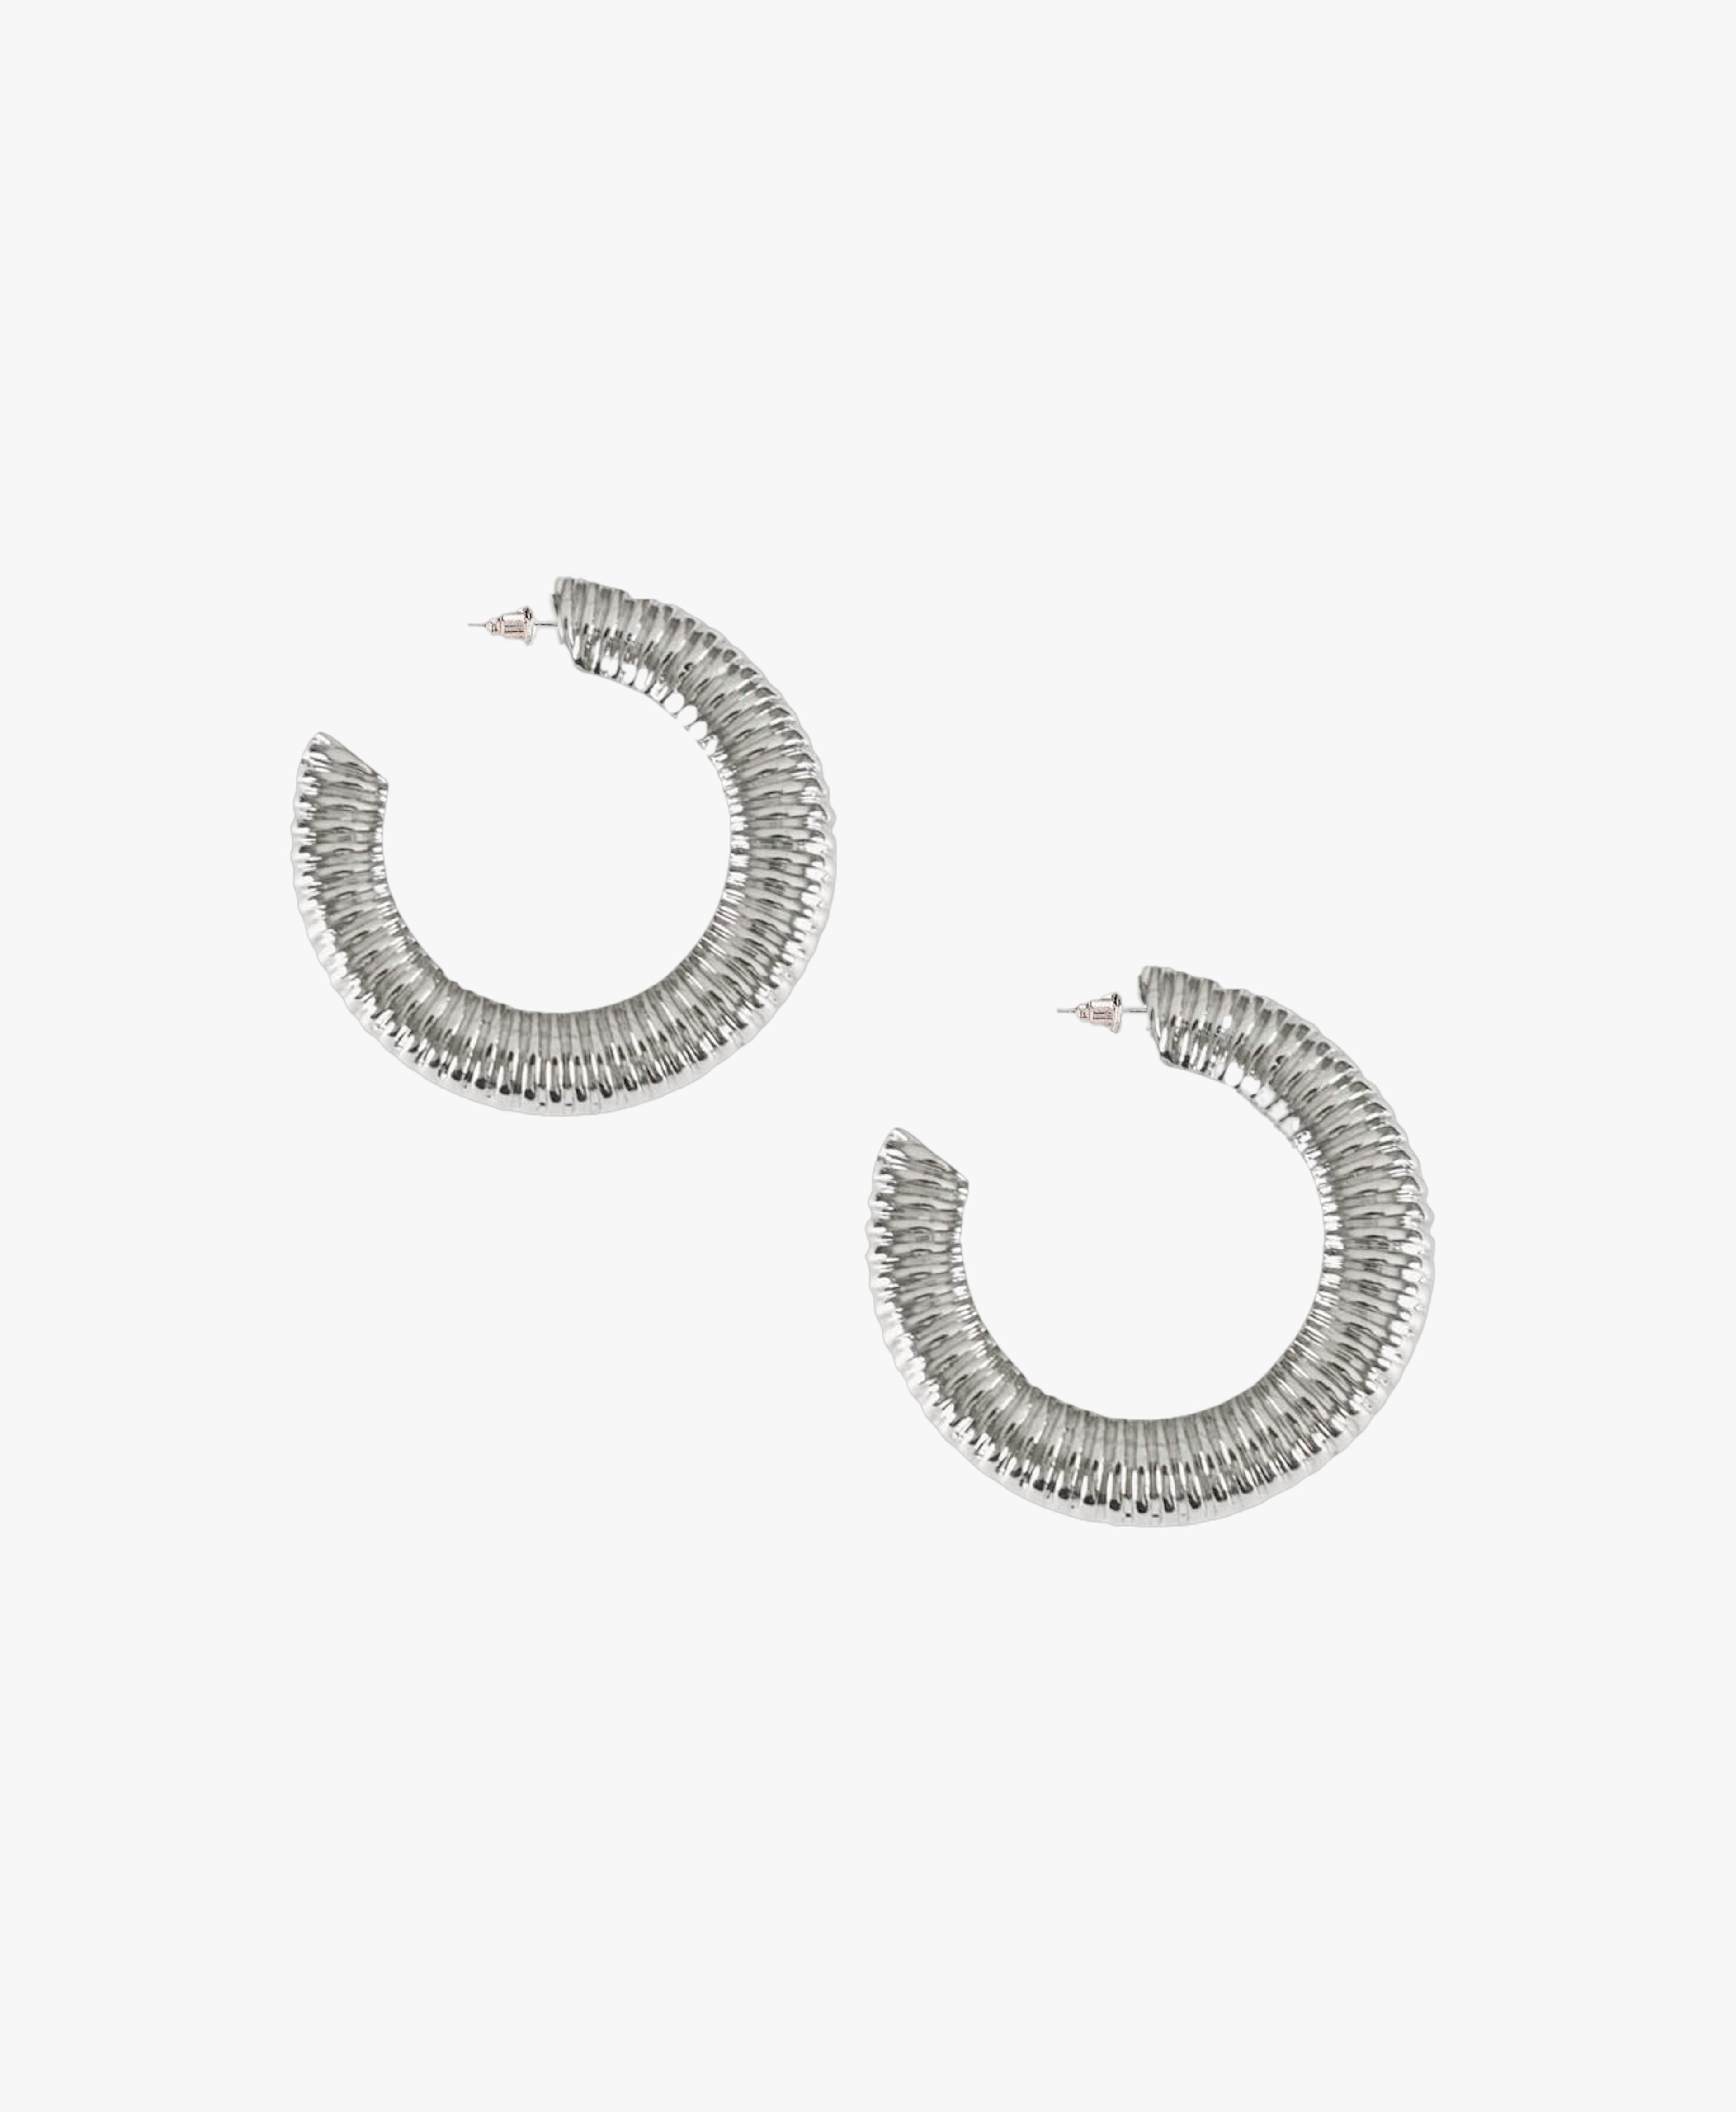 Shop Iris Silver Hoop Earring from THE GALA at Seezona | Seezona